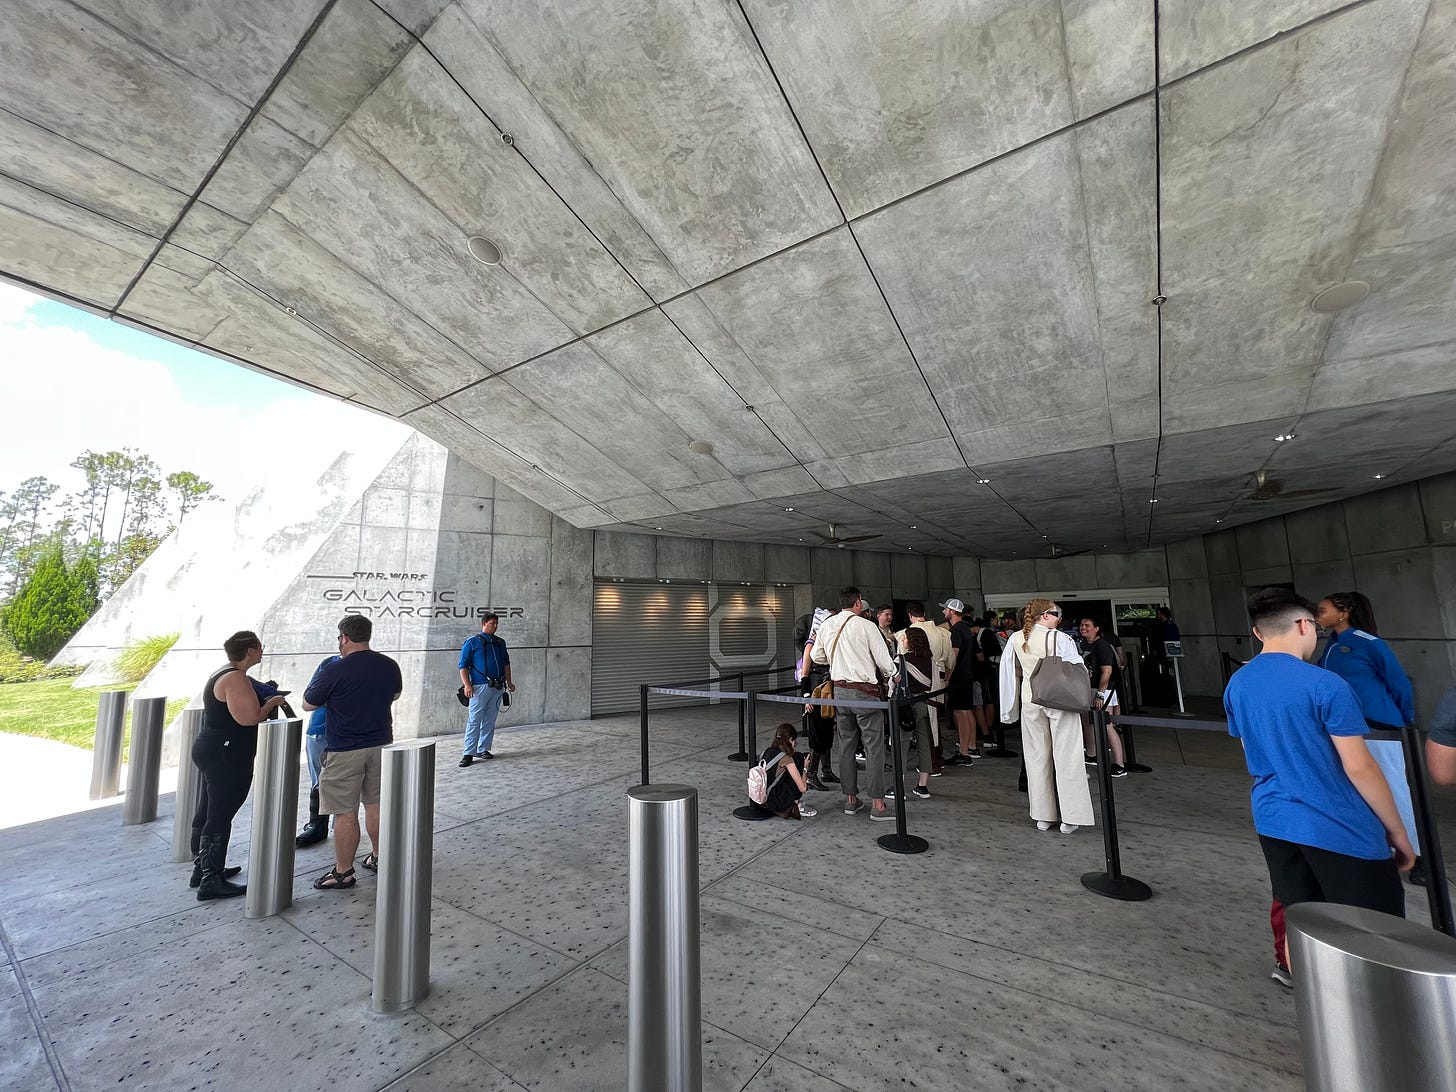 People queuing in a grey concrete foyer